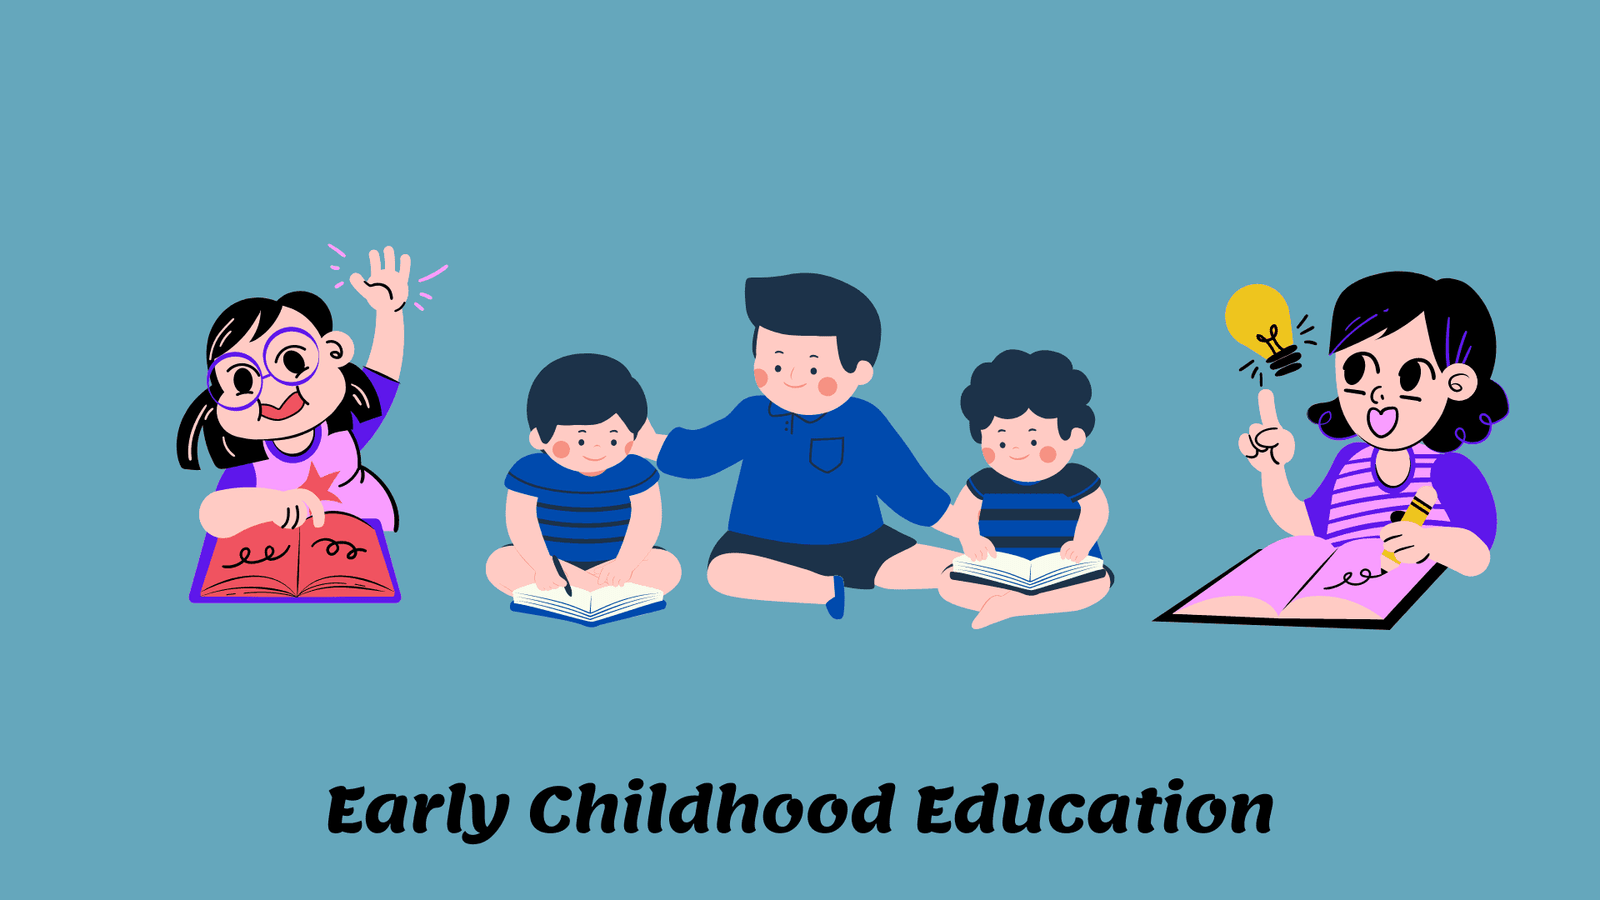 Where Can Parents Find Resources for Early Childhood Education Image